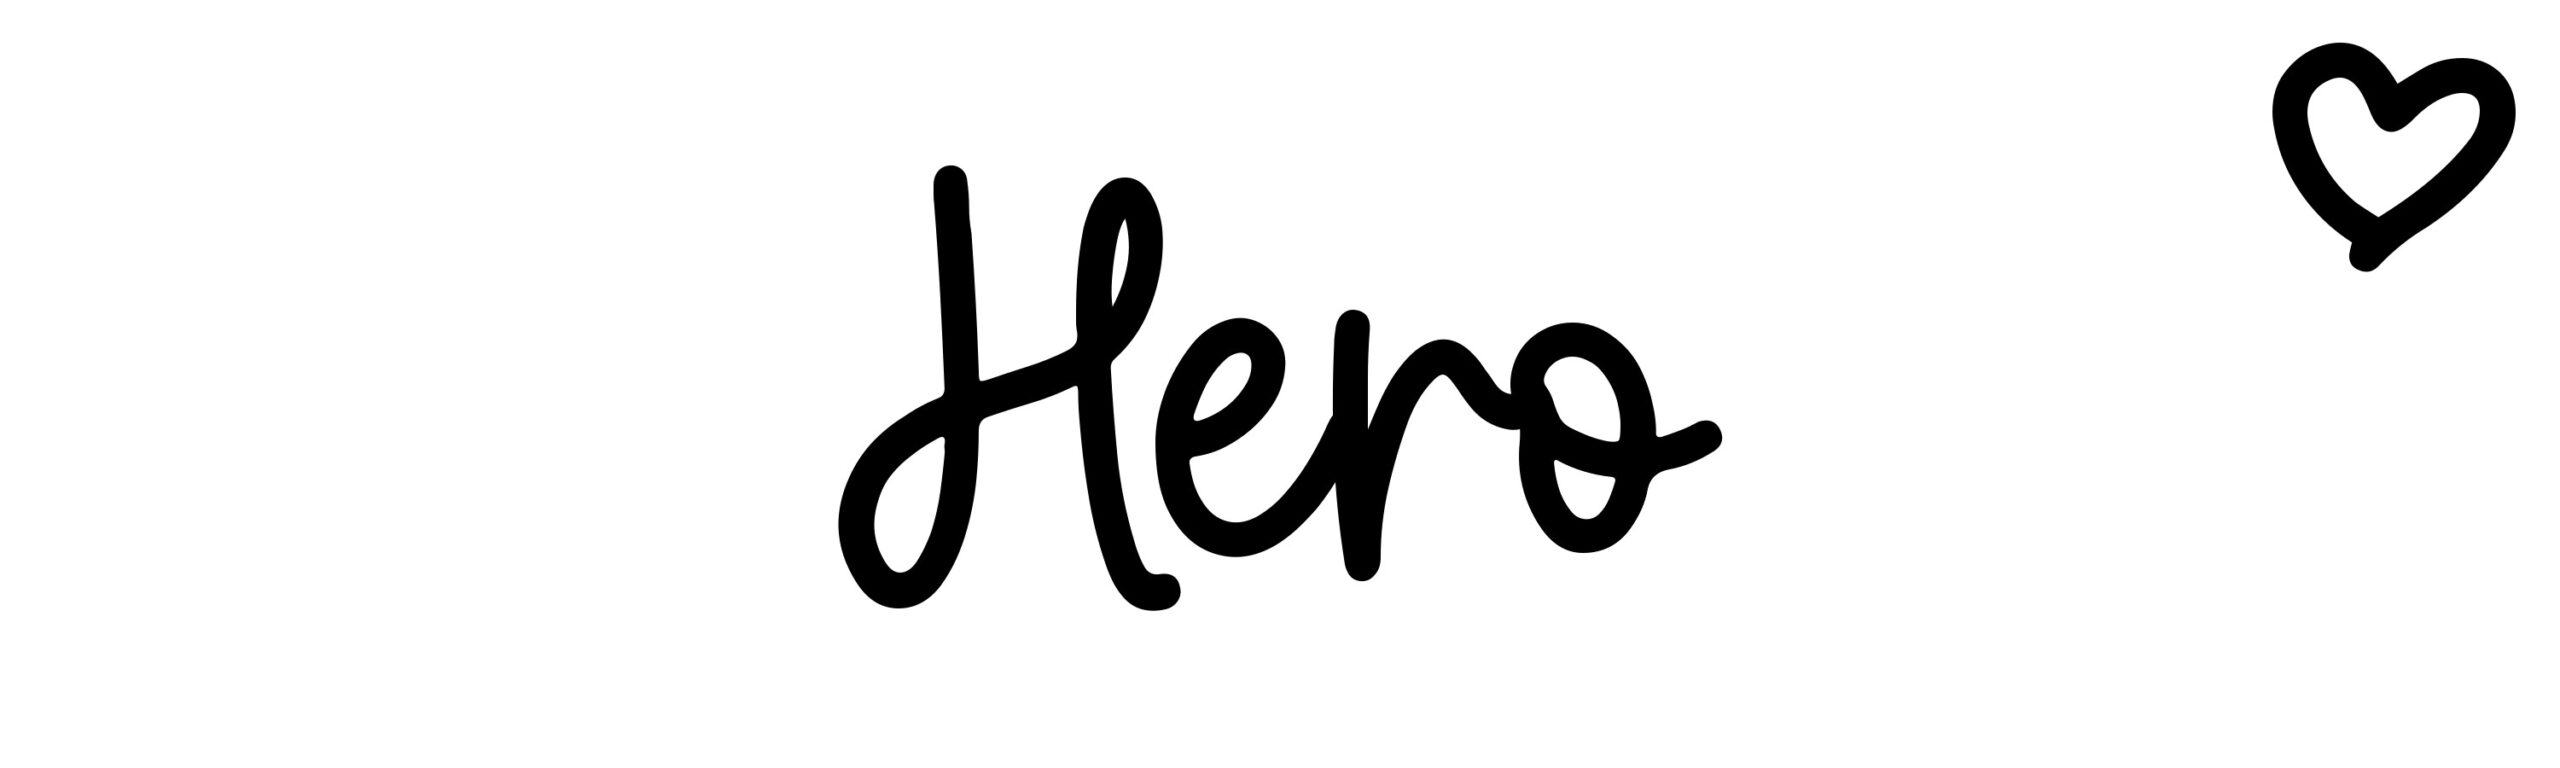 Hero Free Stock Photos, Images, and Pictures of Hero